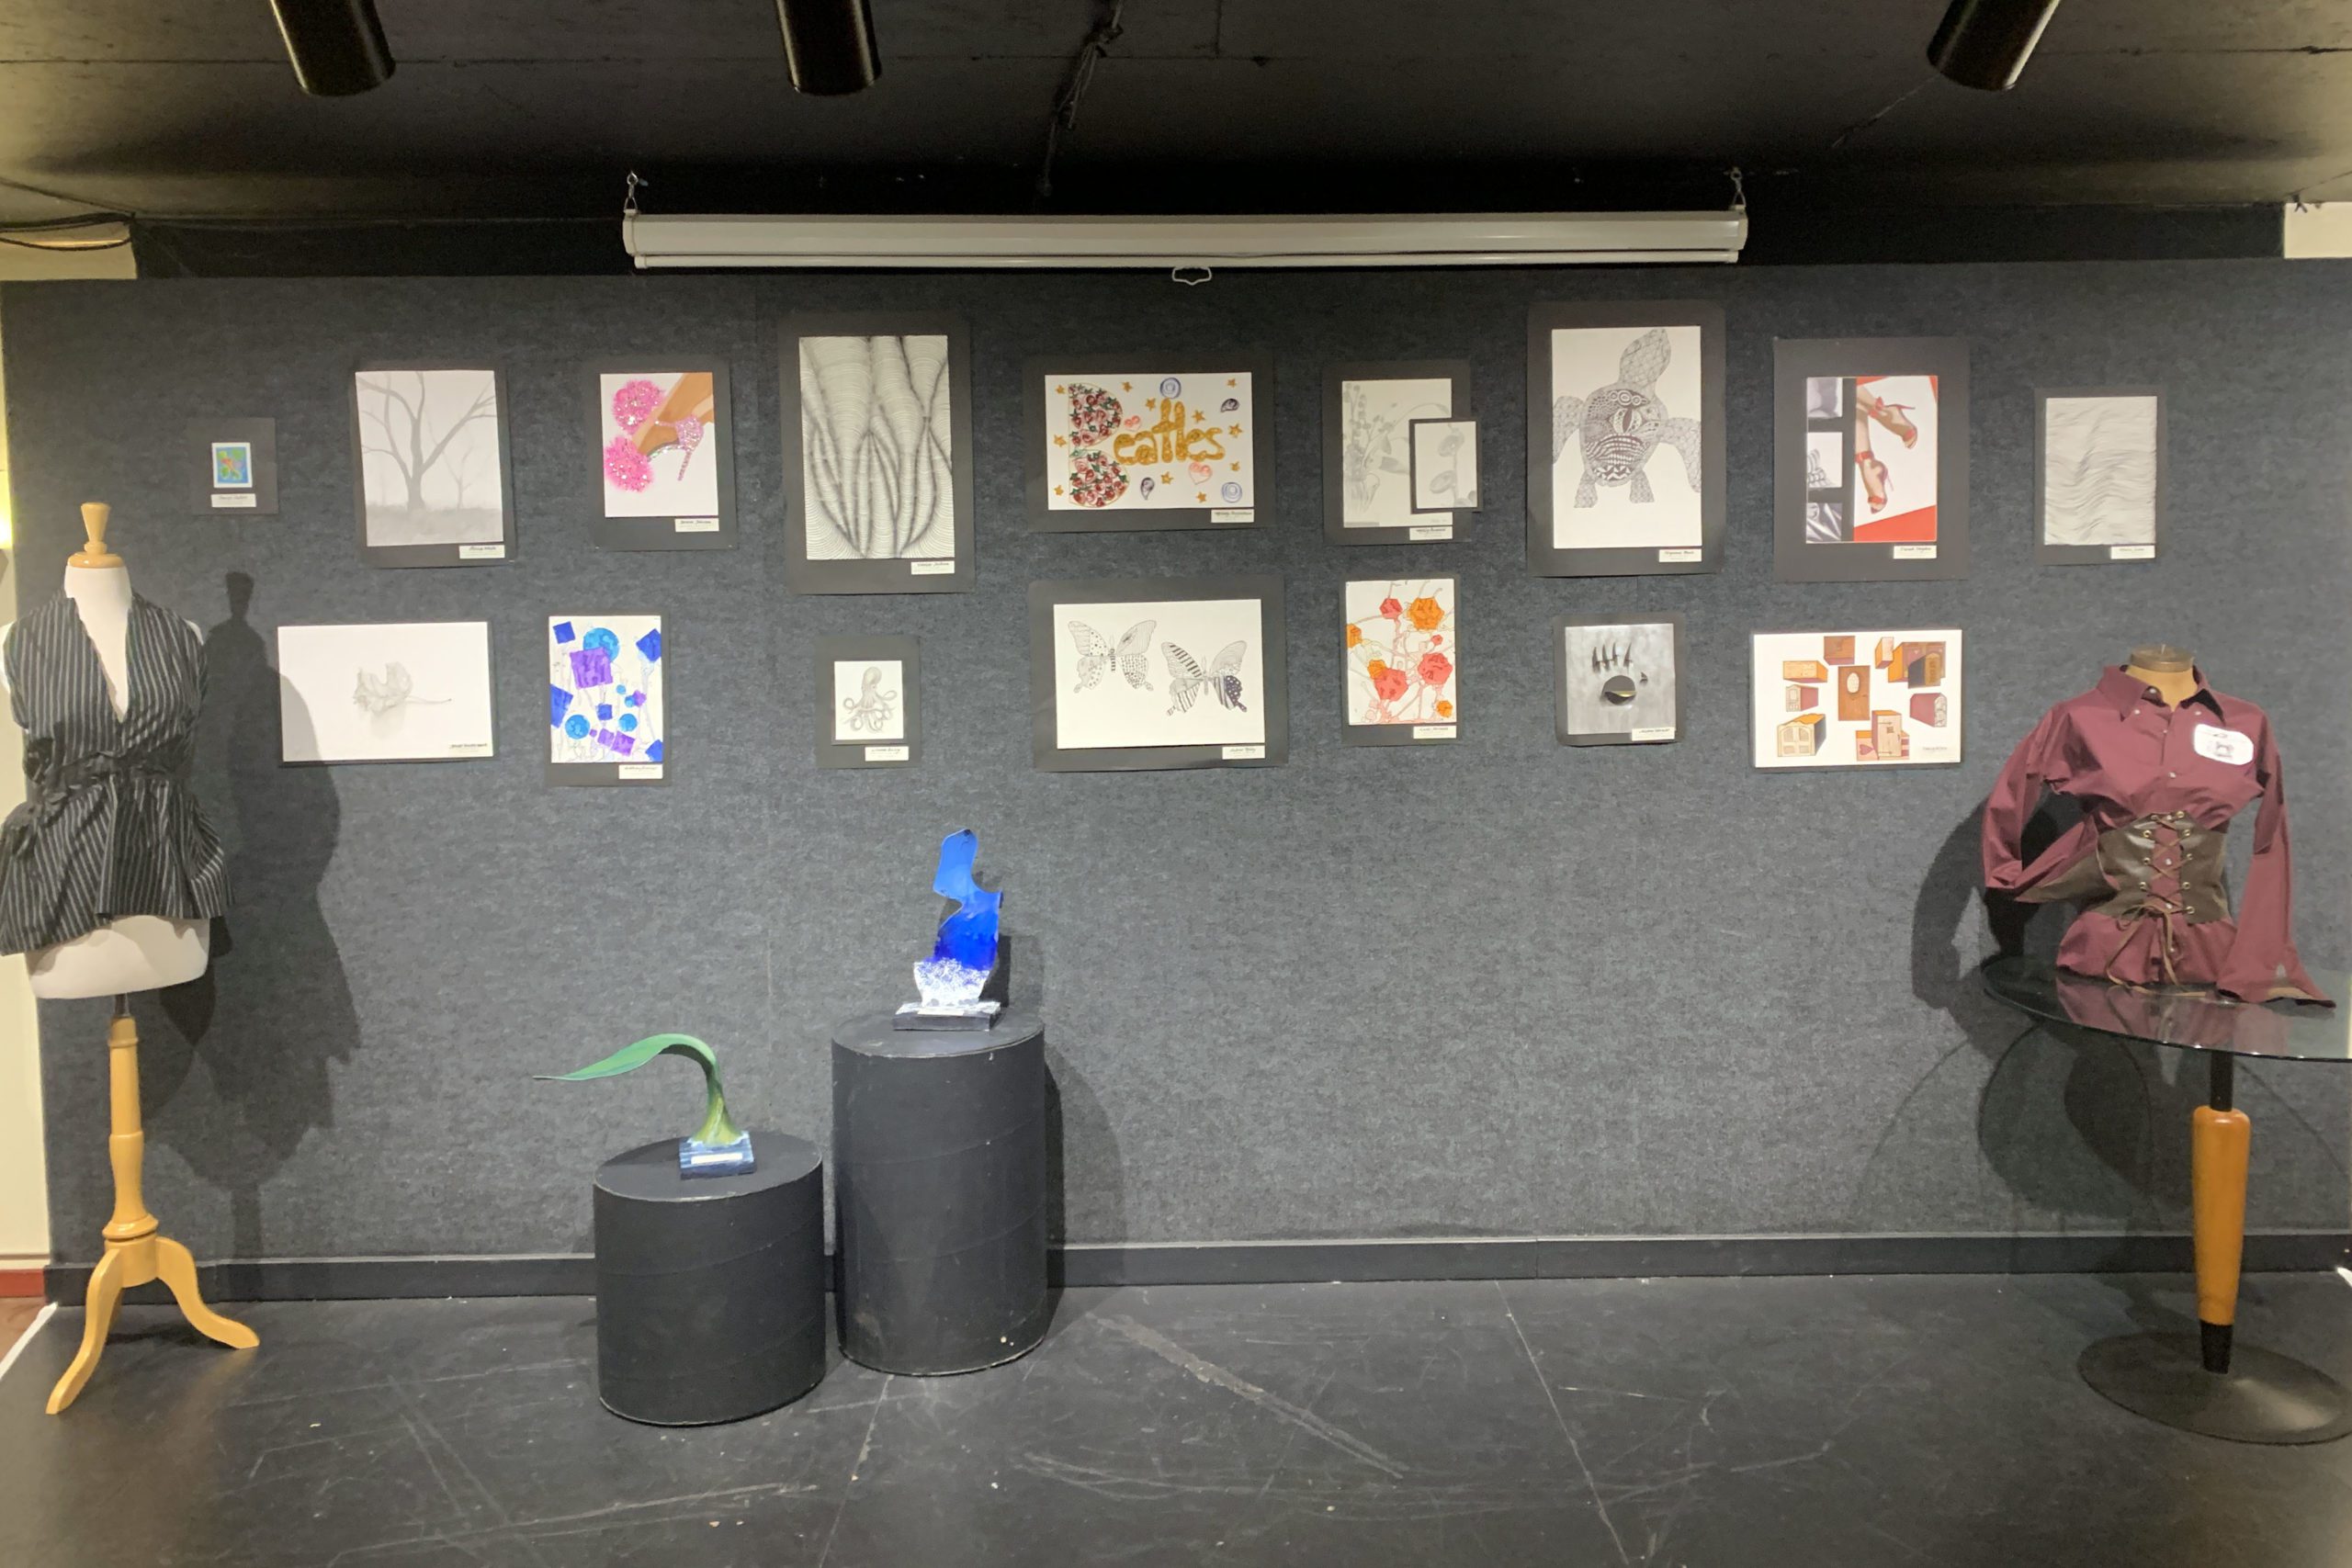 student drawings, sculpture, and fashion on display